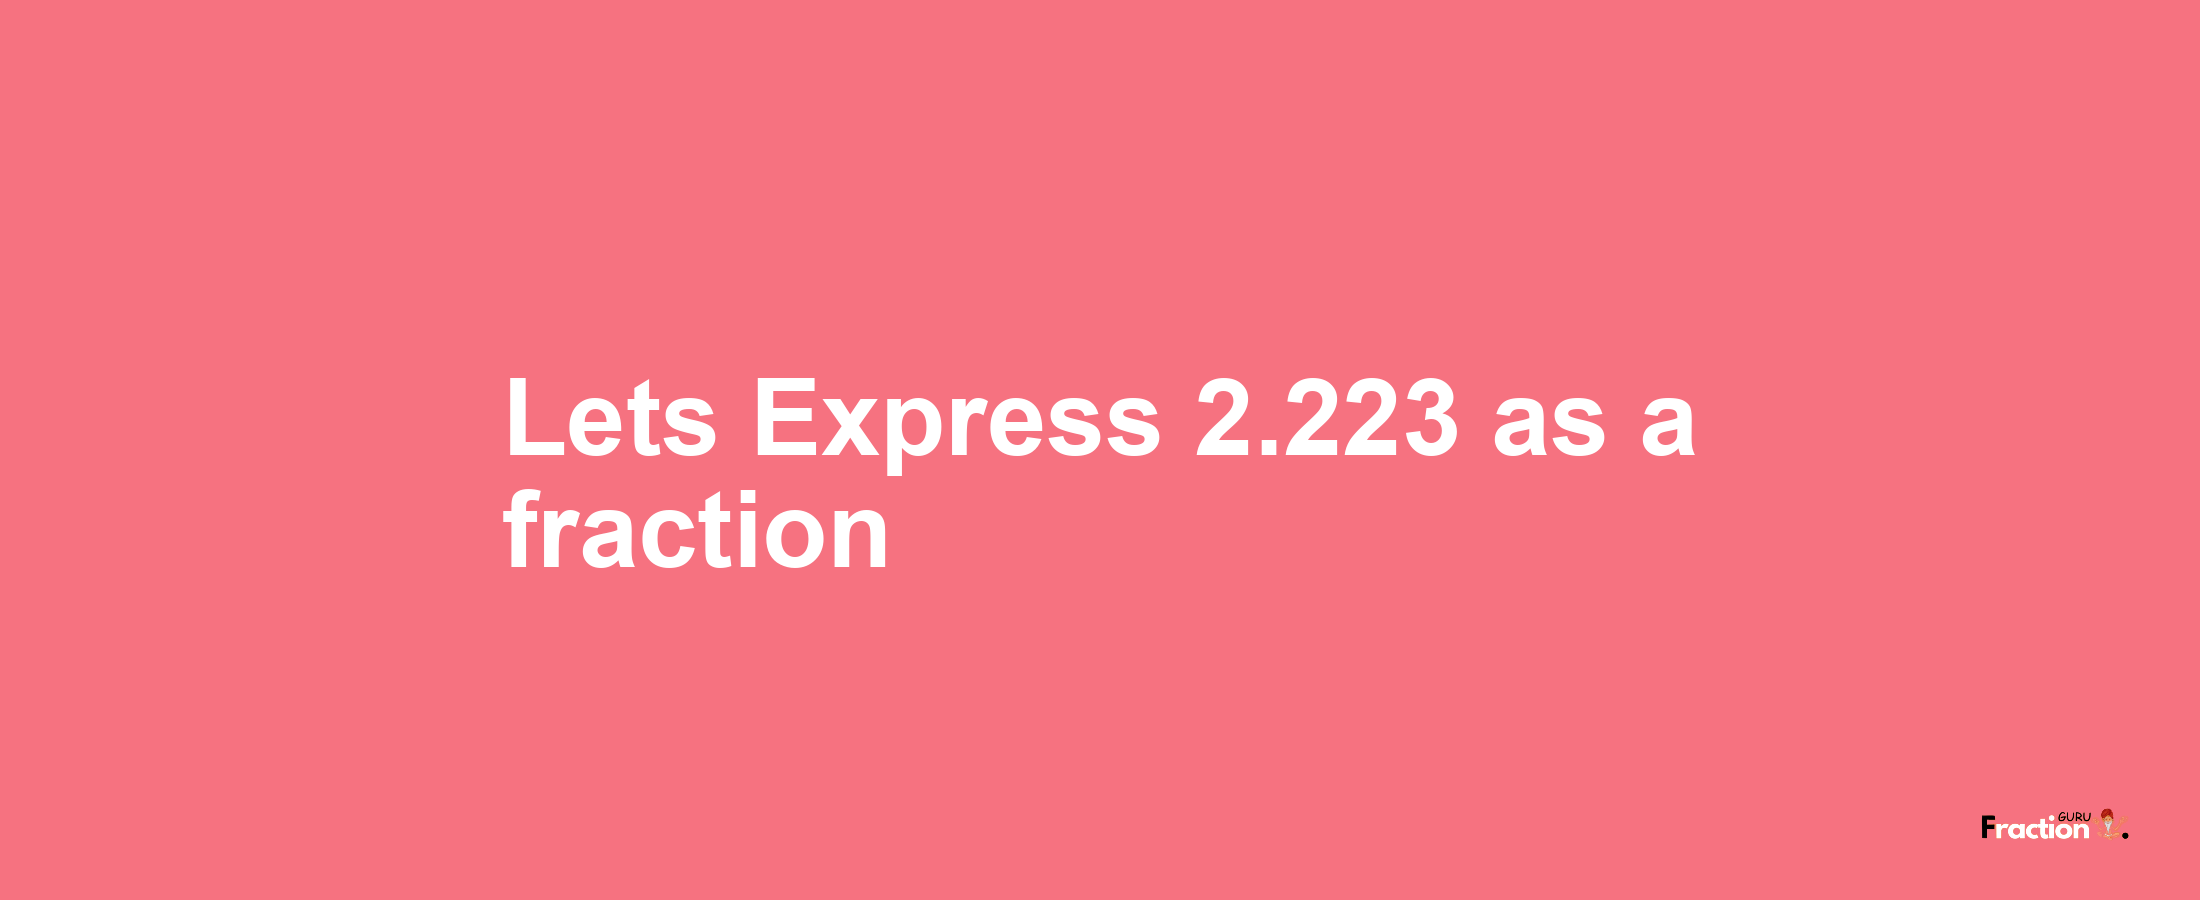 Lets Express 2.223 as afraction